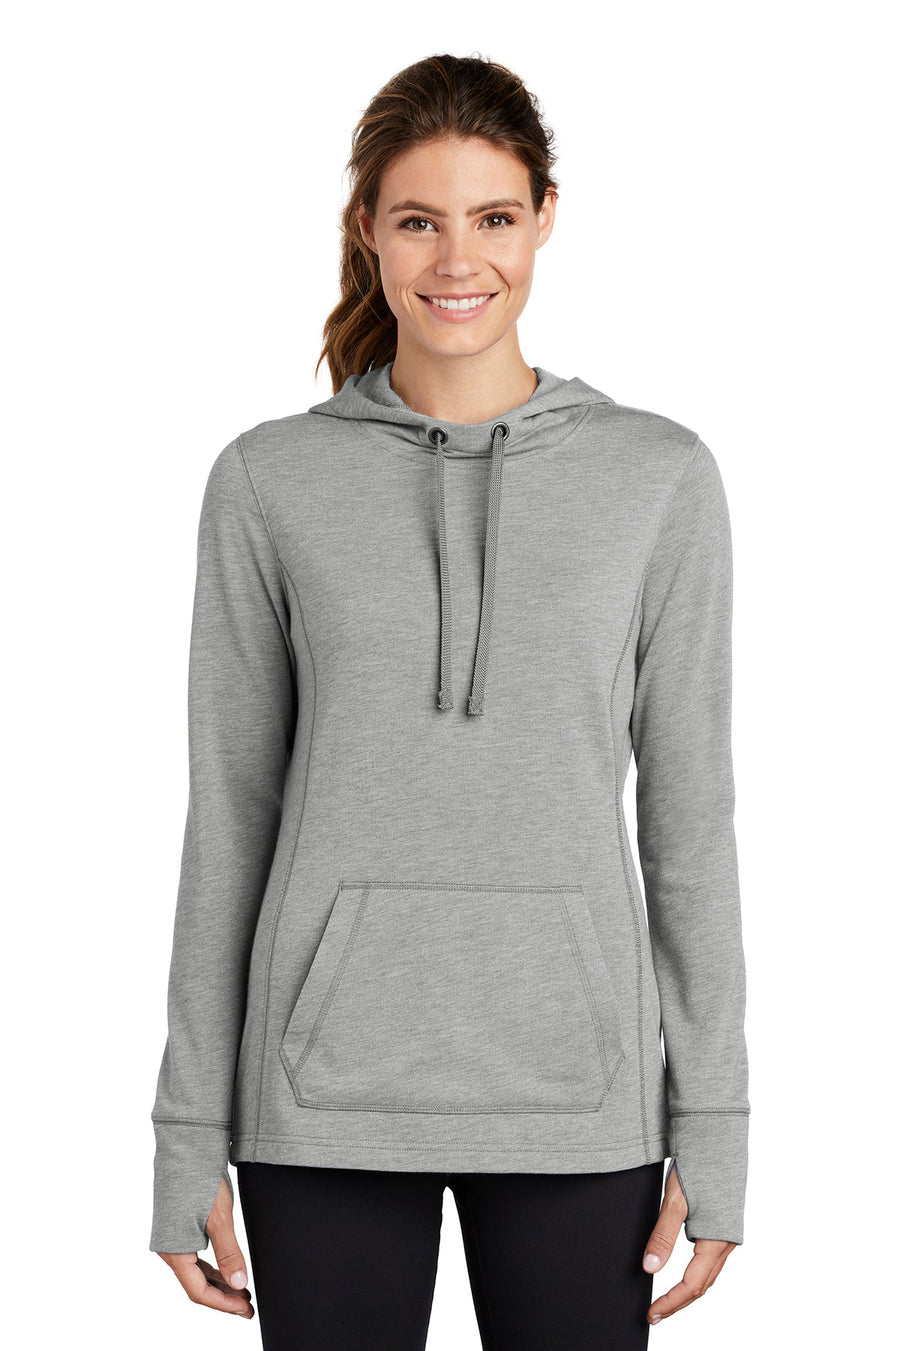 Women's Tri-Blend Wicking Fleece Hooded Pullover - Clay Soccer